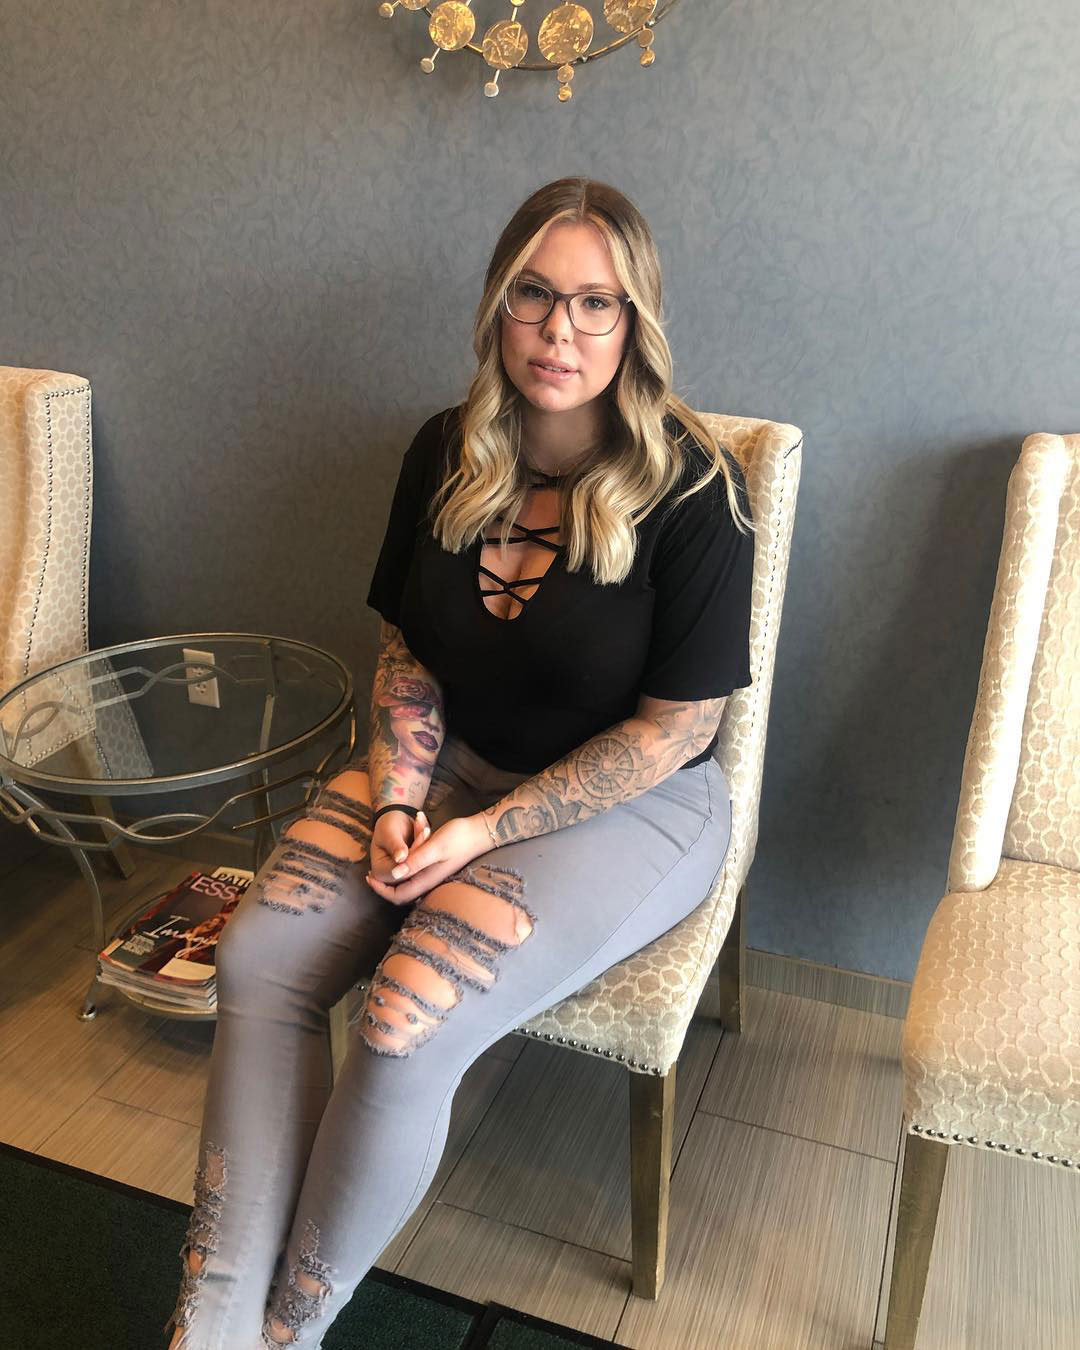 Candid Sex On Beach Fantasy - Teen Mom 2's Kailyn Lowry: My Kids Walked in on Me Having Sex